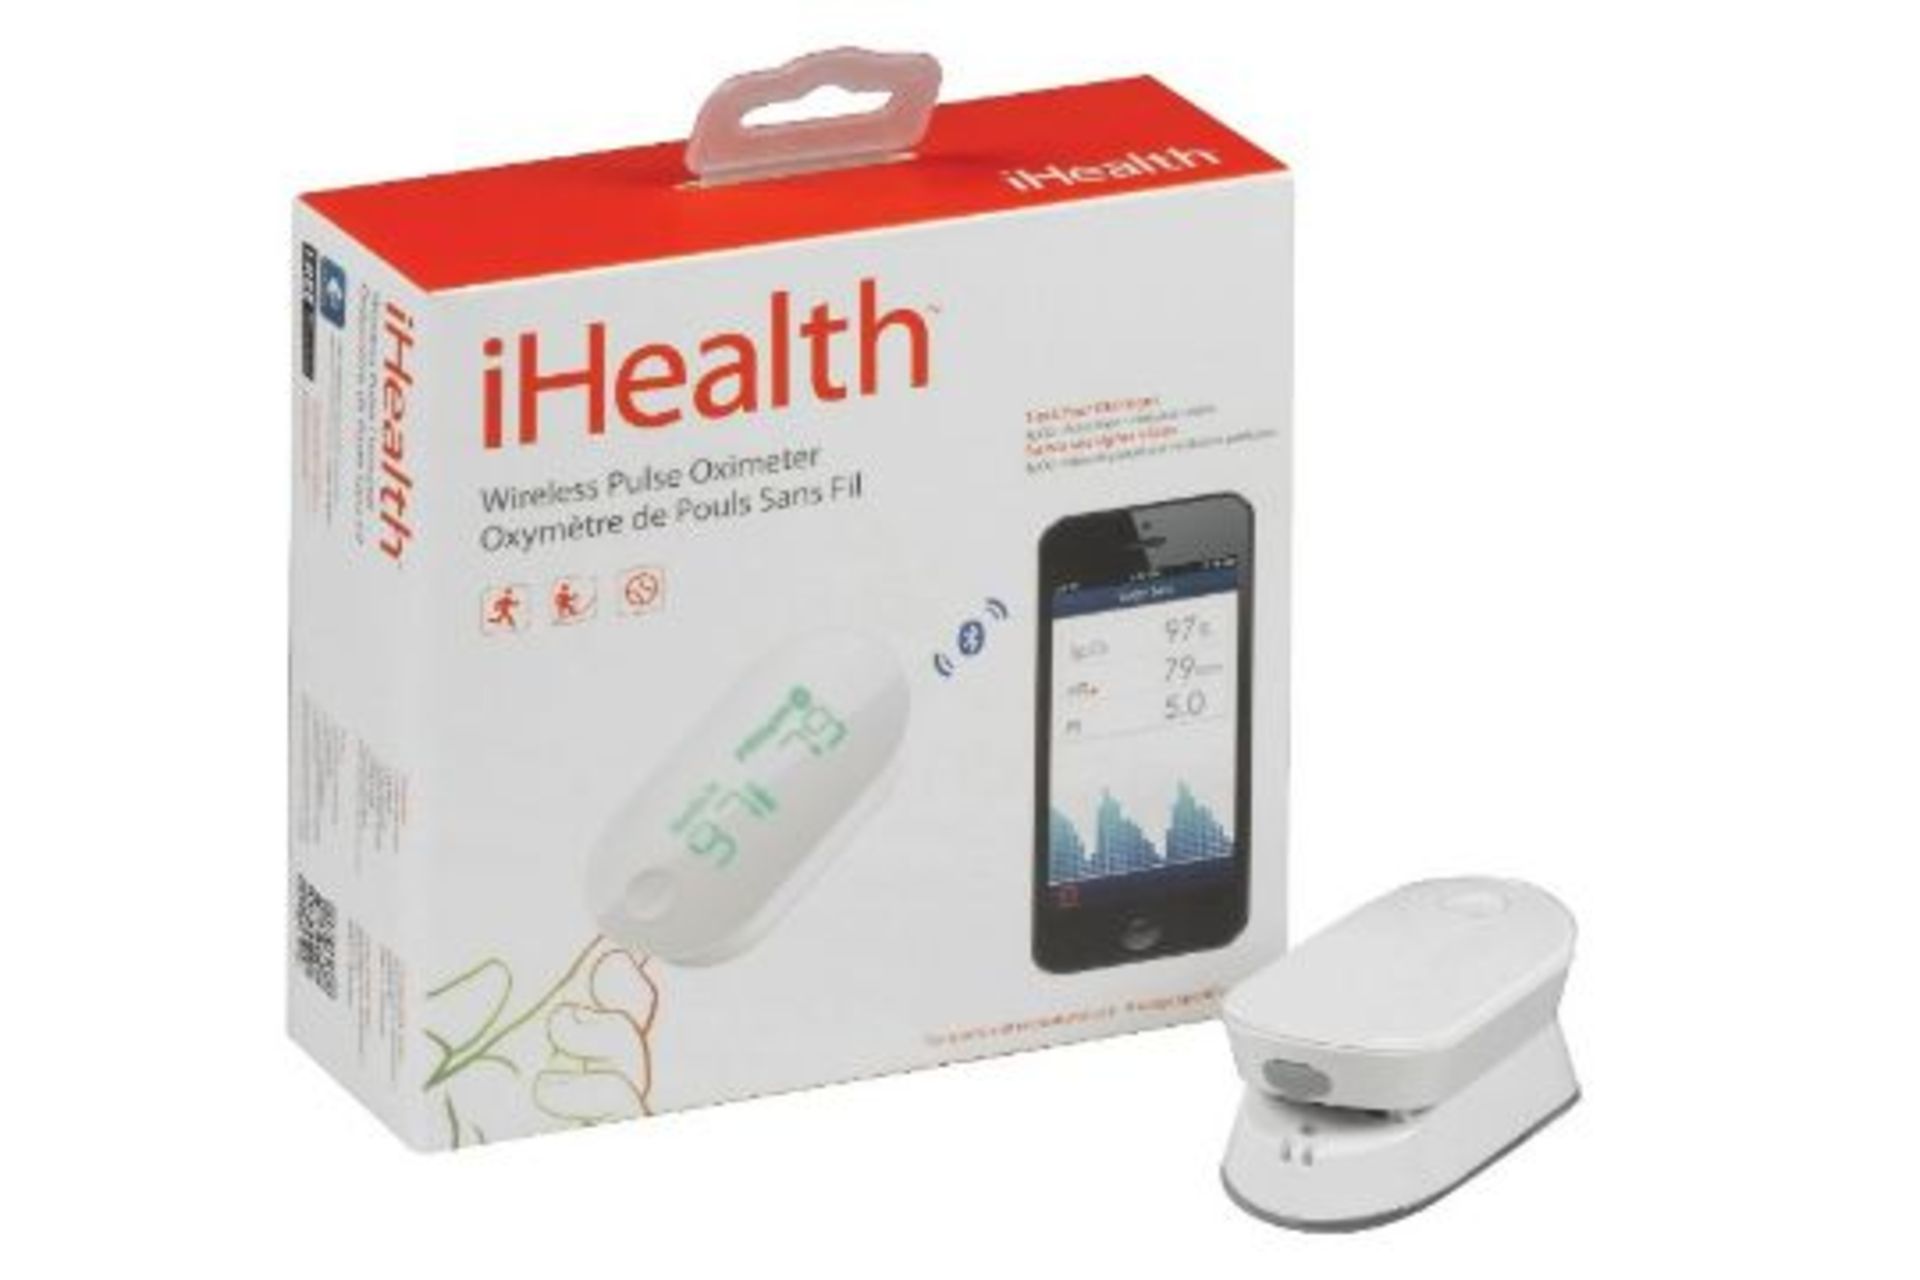 NEW & BOXED iHealth Air Pulse Oximeter. Accurately measure your blood oxygen level, pulse rate,